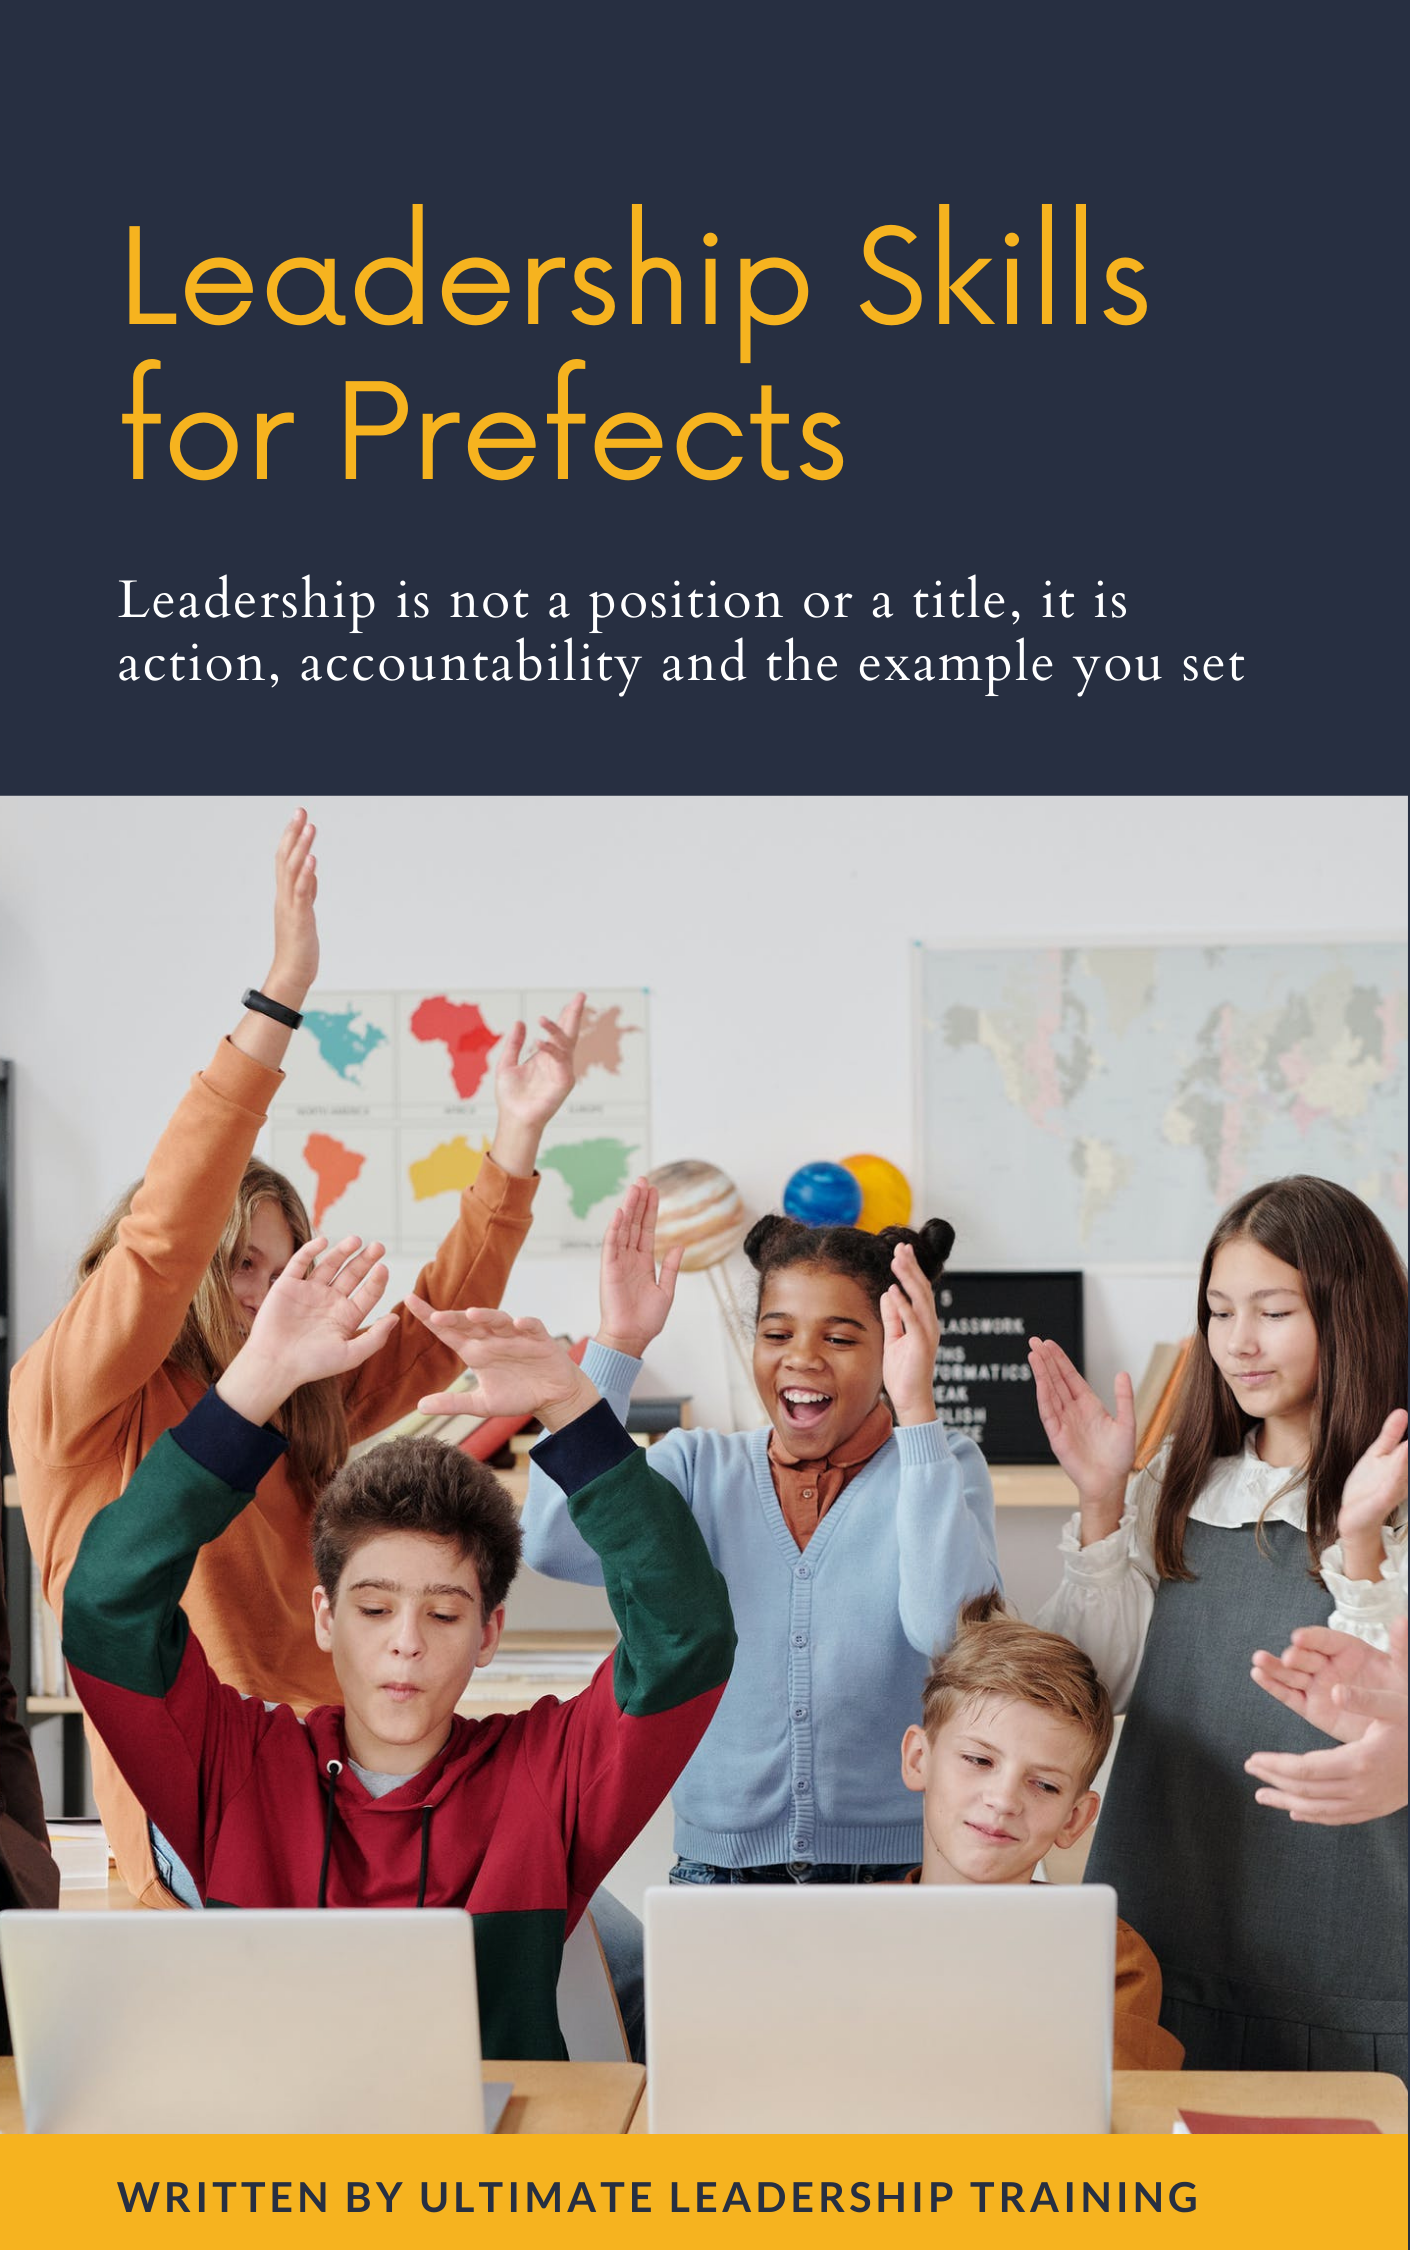 The leadership skills for prefects course workbook